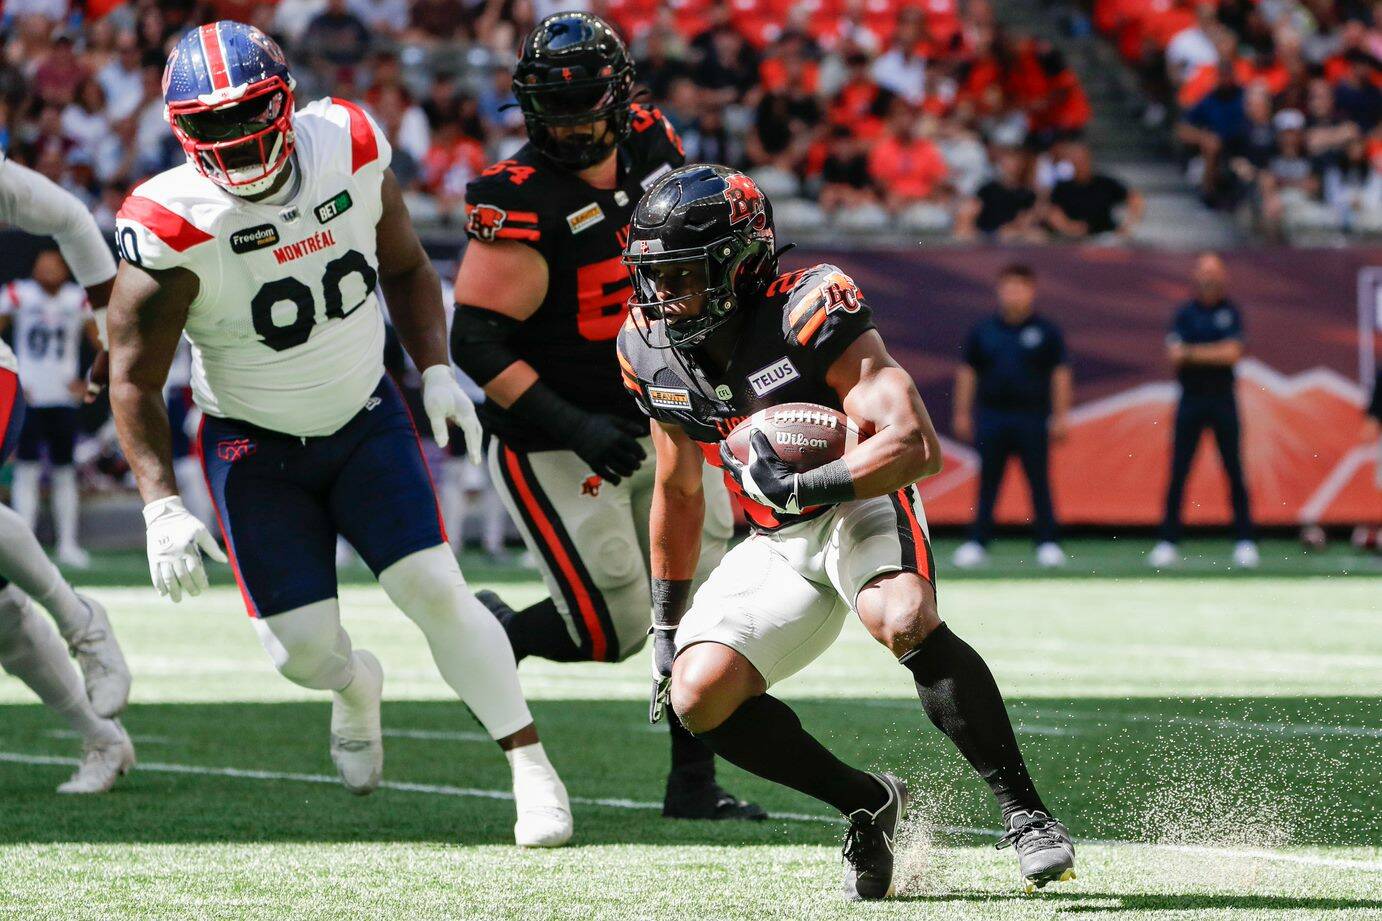 Lions running back Shaun Shivers looks for a gap against the Montreal defence. Shivers would finish with 136 yards of offence in his CFL debut. Photo courtesy of Steven Chang, B.C. Lions